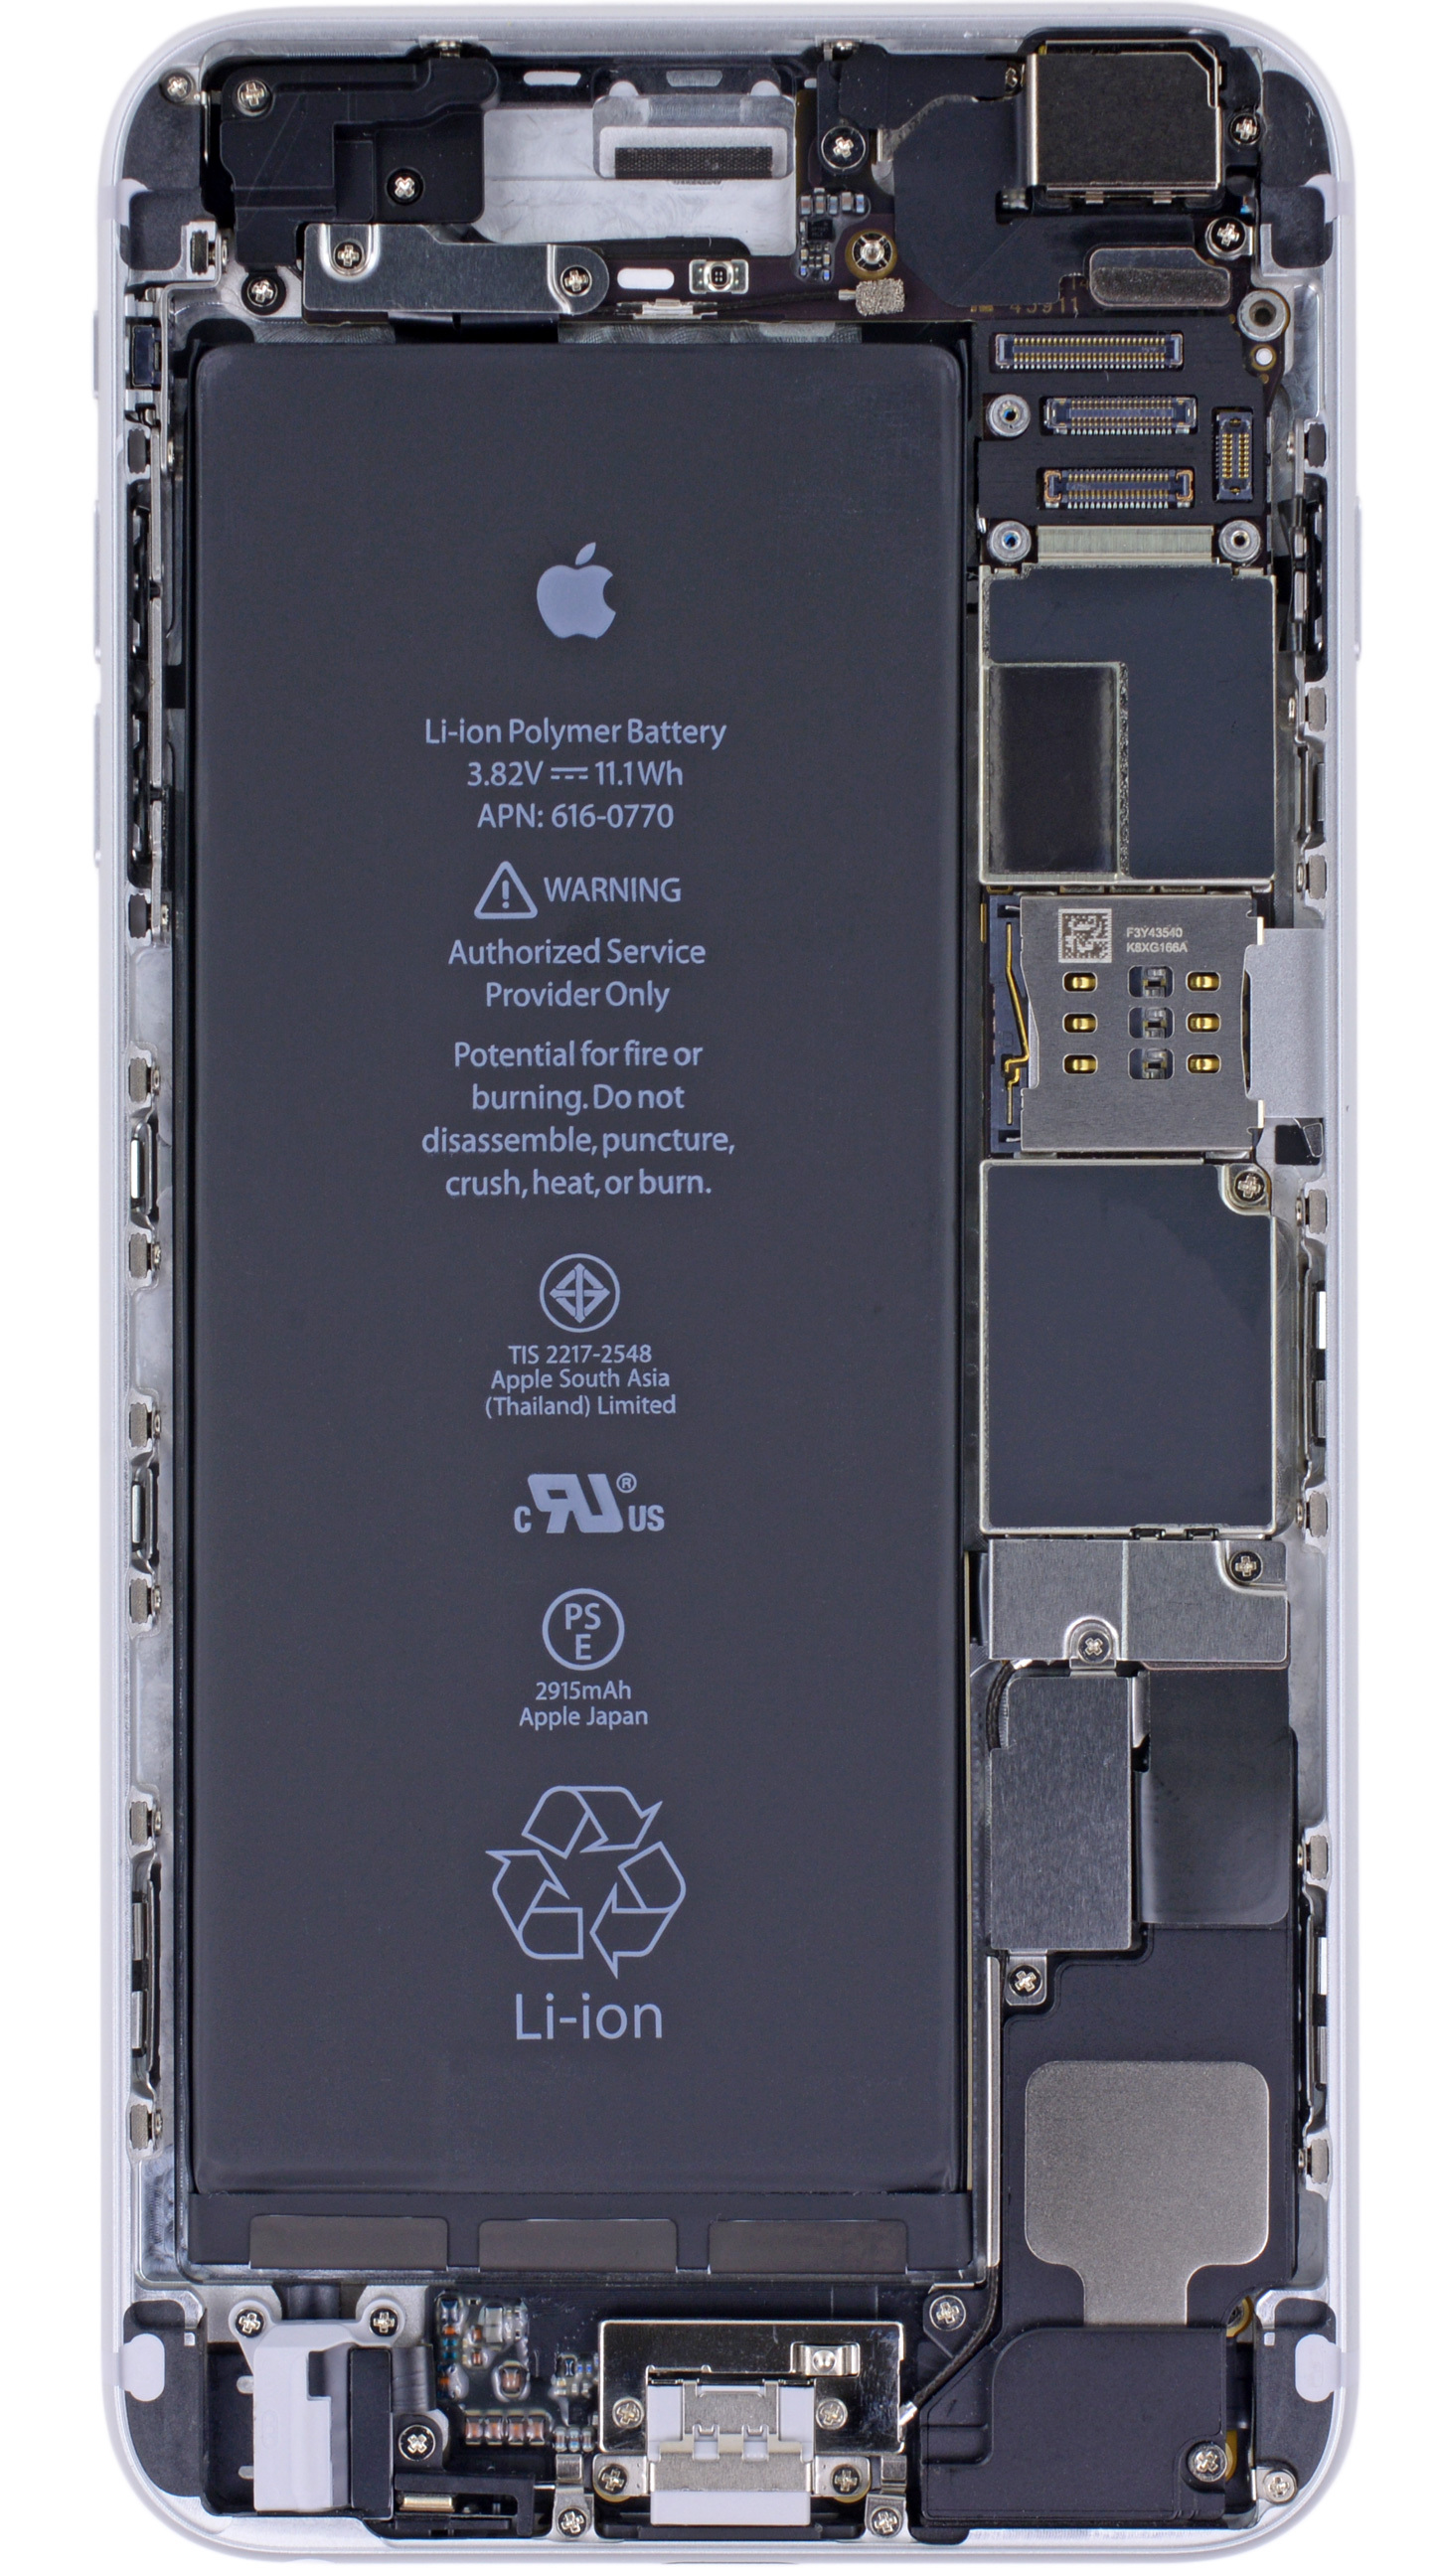 X-Ray Vision Internals Wallpaper for the iPhone 6, iPhone 6 Plus, iPad Air [Download]